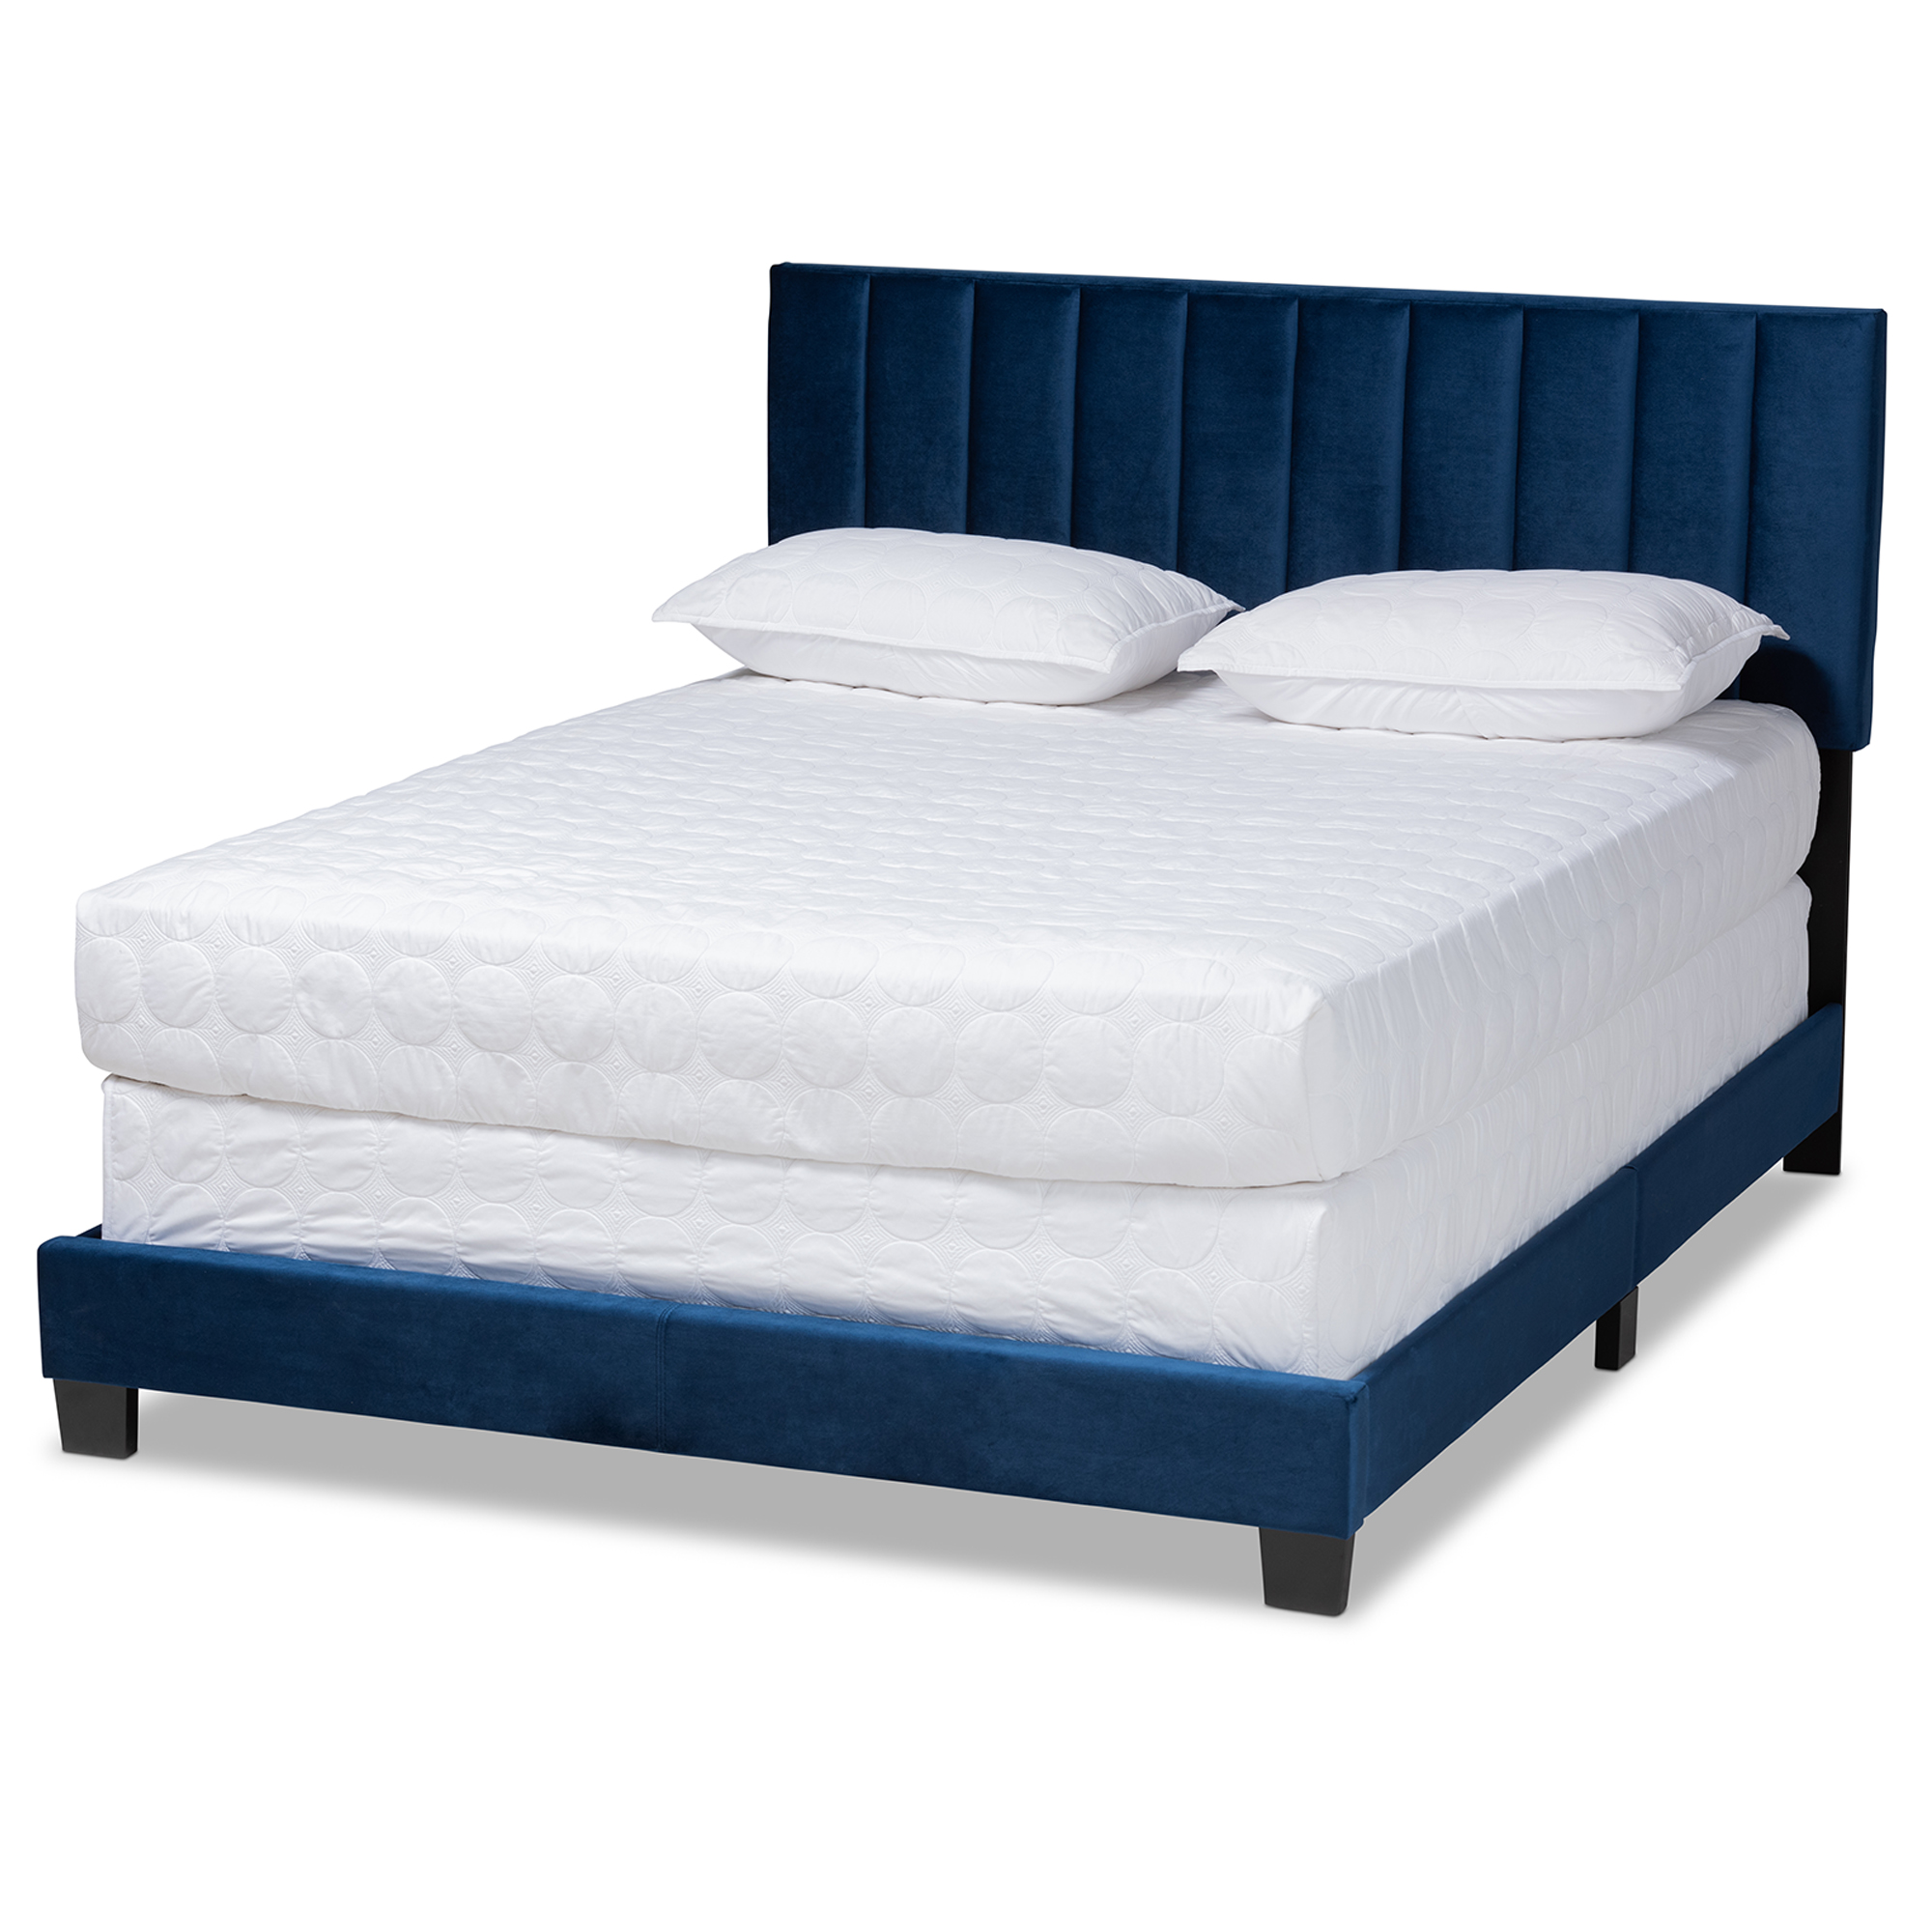 Skyline Decor Navy Blue Velvet Fabric Upholstered Full Size Panel Bed with Channel Tufted Headboard - image 2 of 5